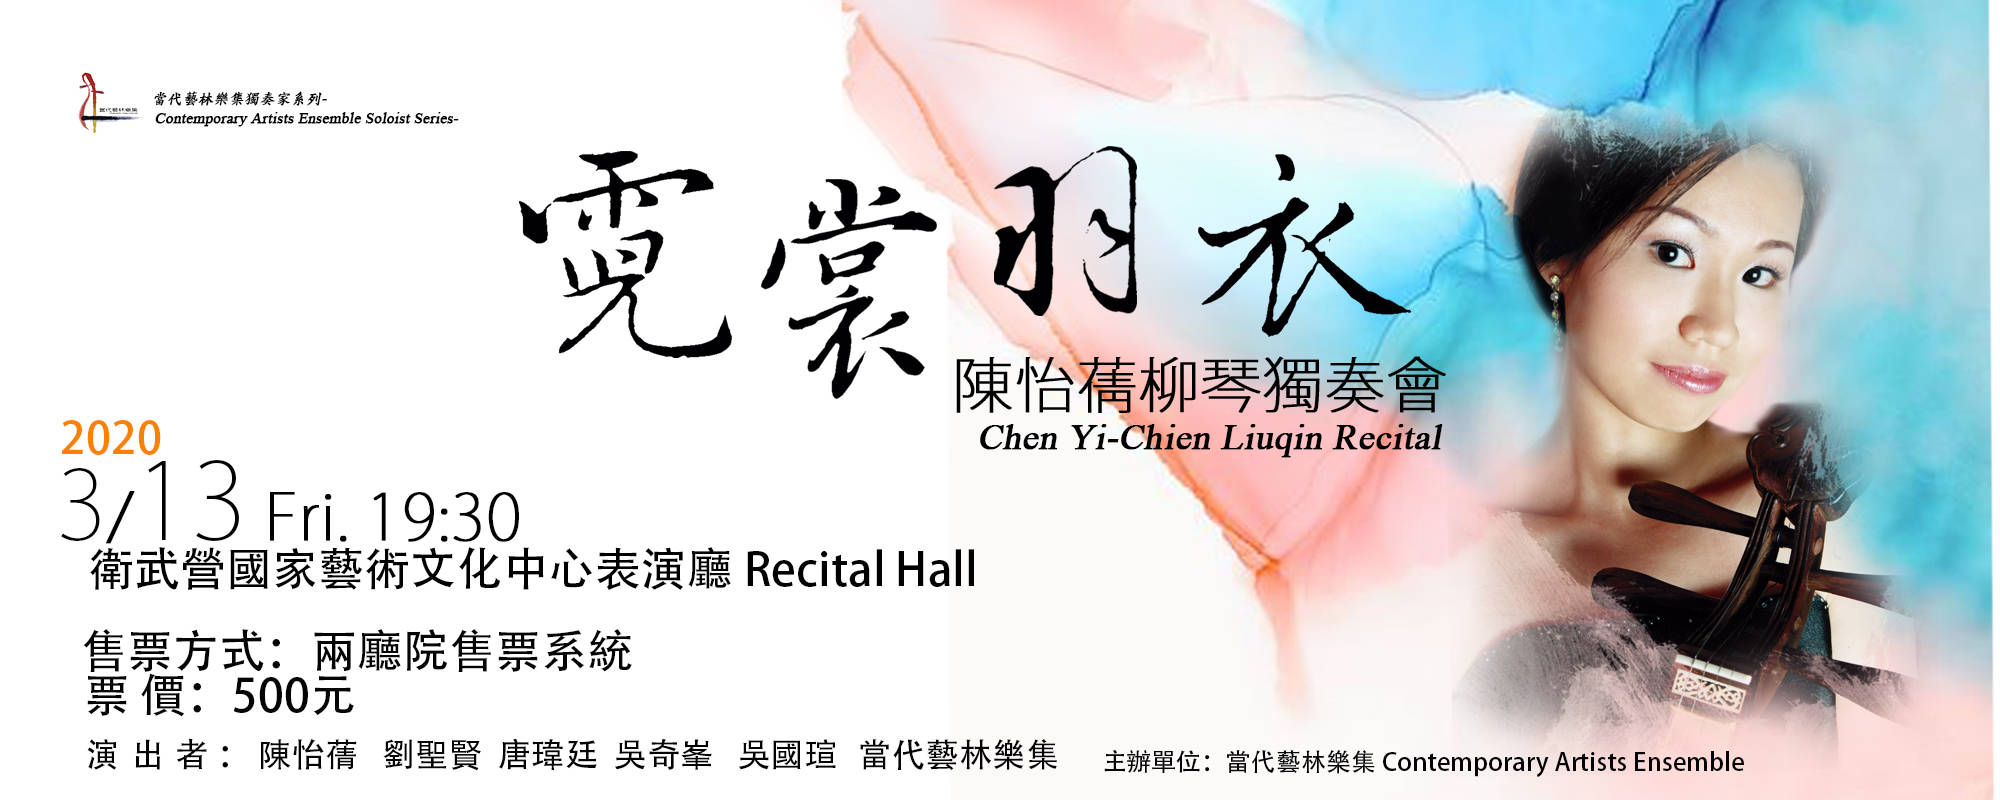 “The Garment of Rainbows and Feathers”- 2020 Chen Yi-Chien Liuqin Recital